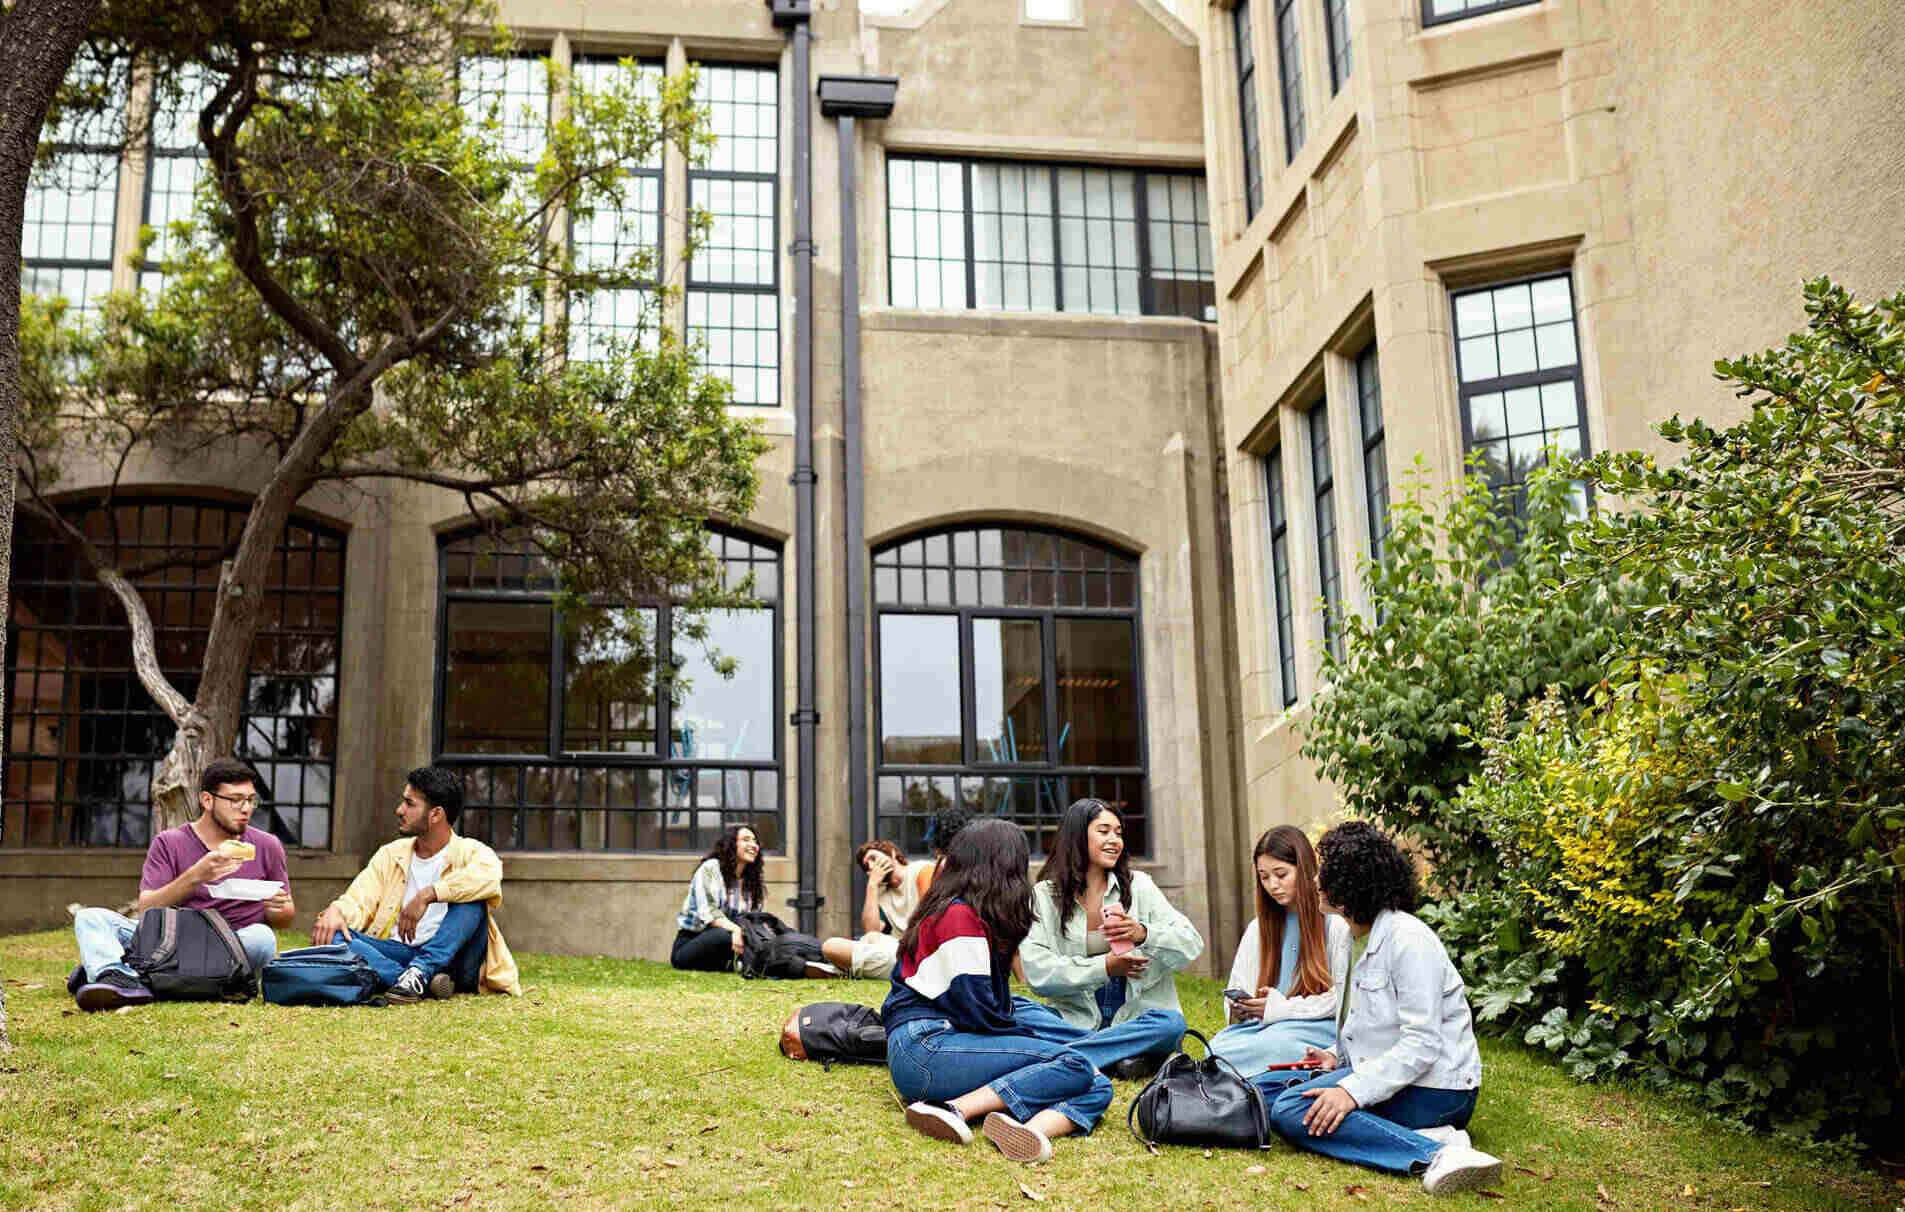 University students taking a break on campus between classes